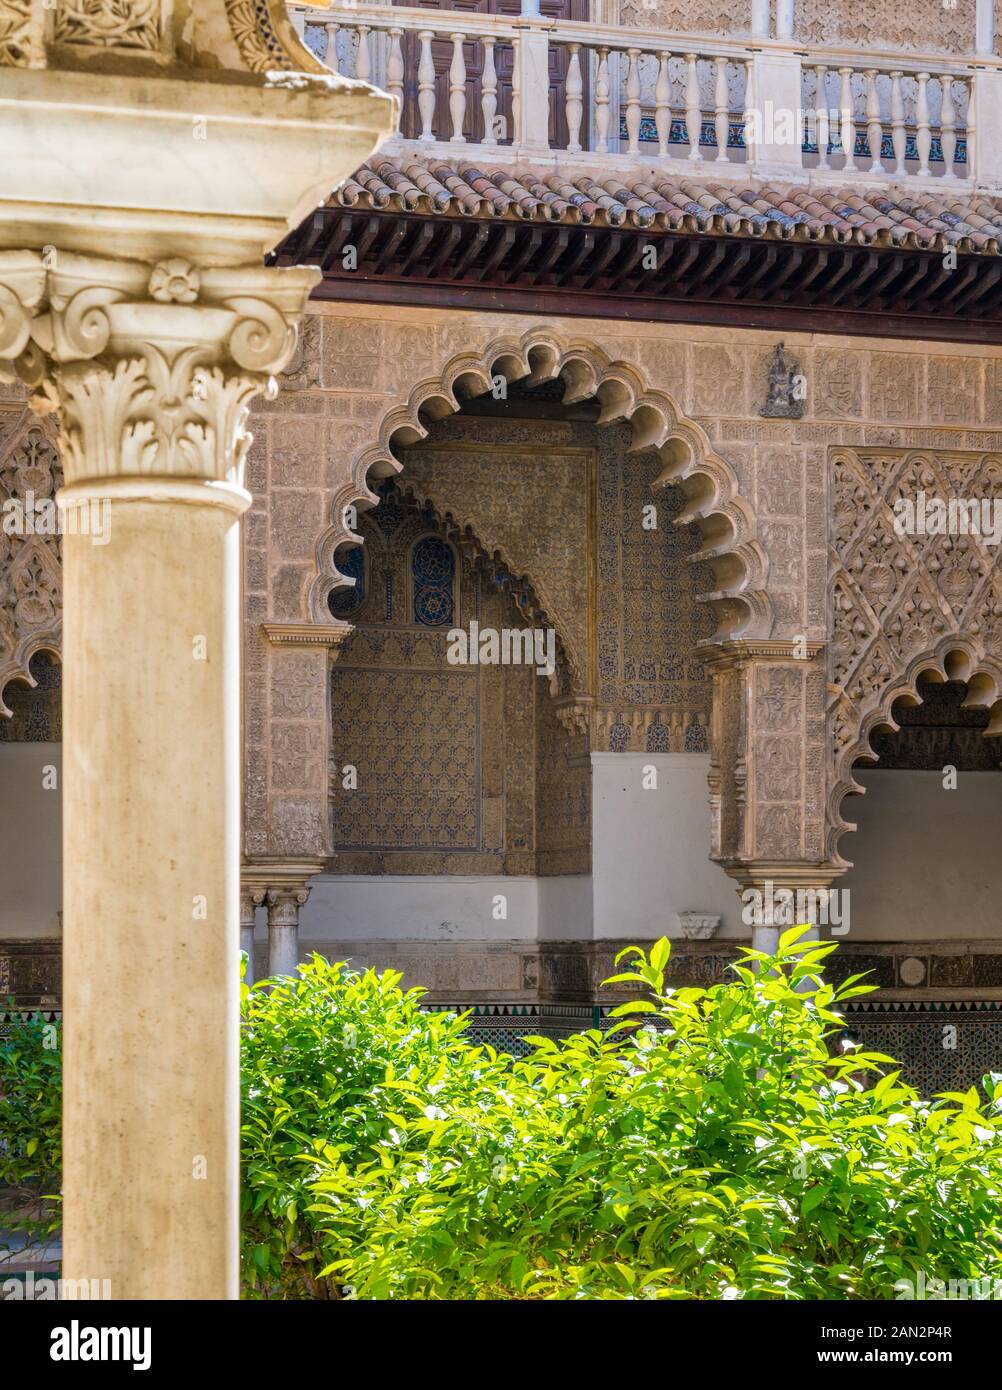 Detail from the 'Patio de las Doncellas' in the Royal Alcazars of Seville, Andalusia, Spain. Stock Photo